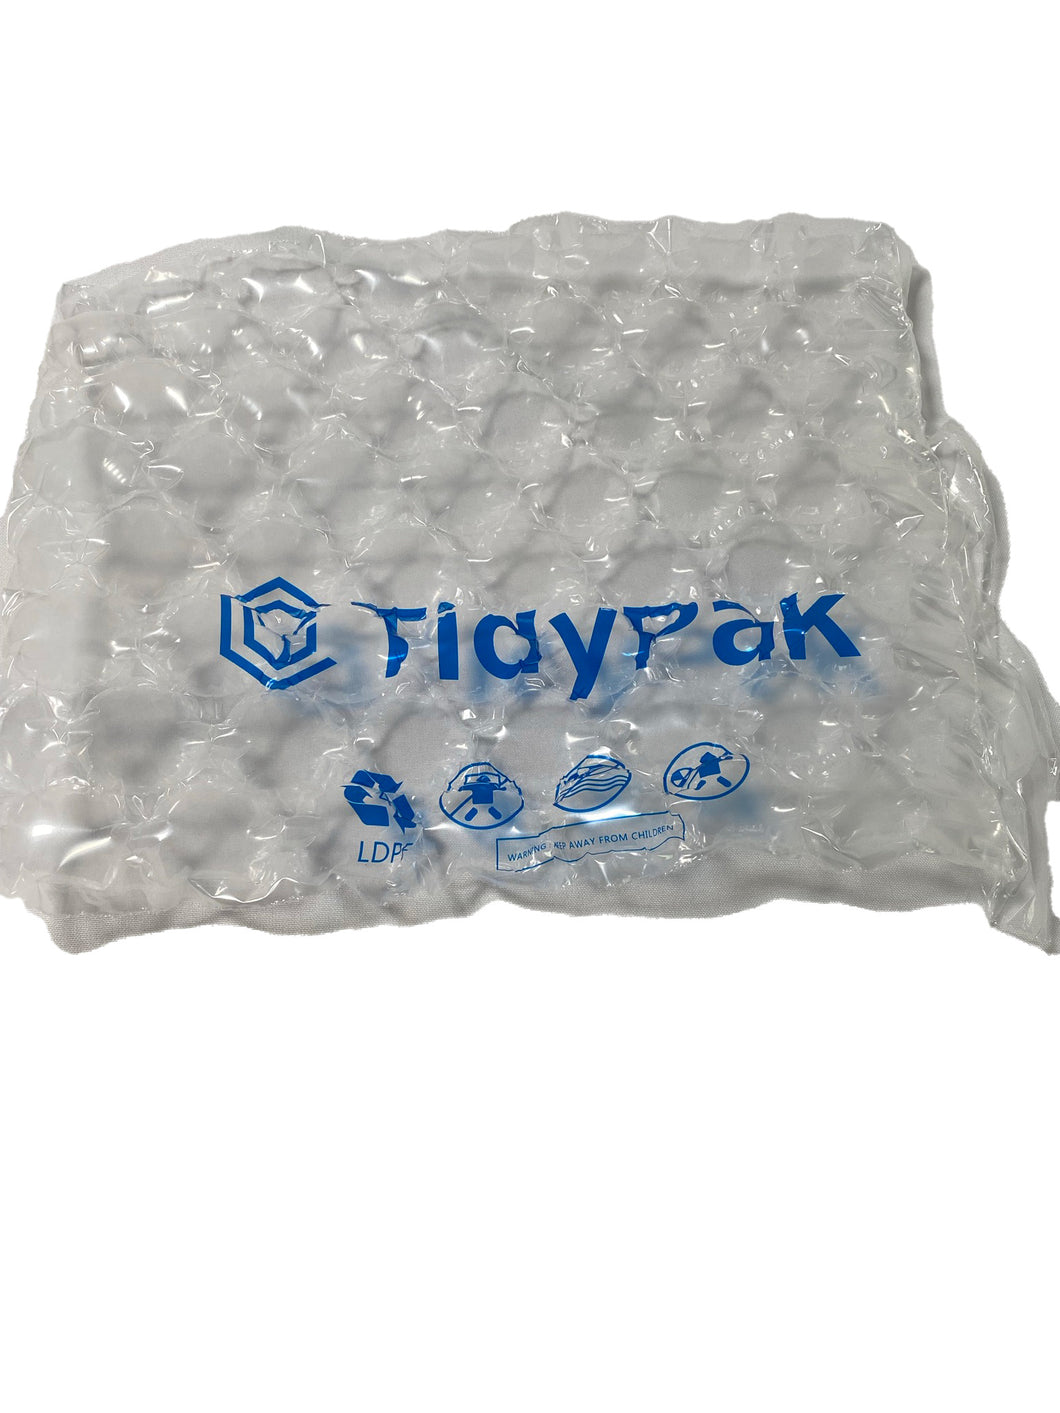 TidyPak Small Bubble Quilt LDPE 32um 984ft (300m) Air Cushion Void Fill Film